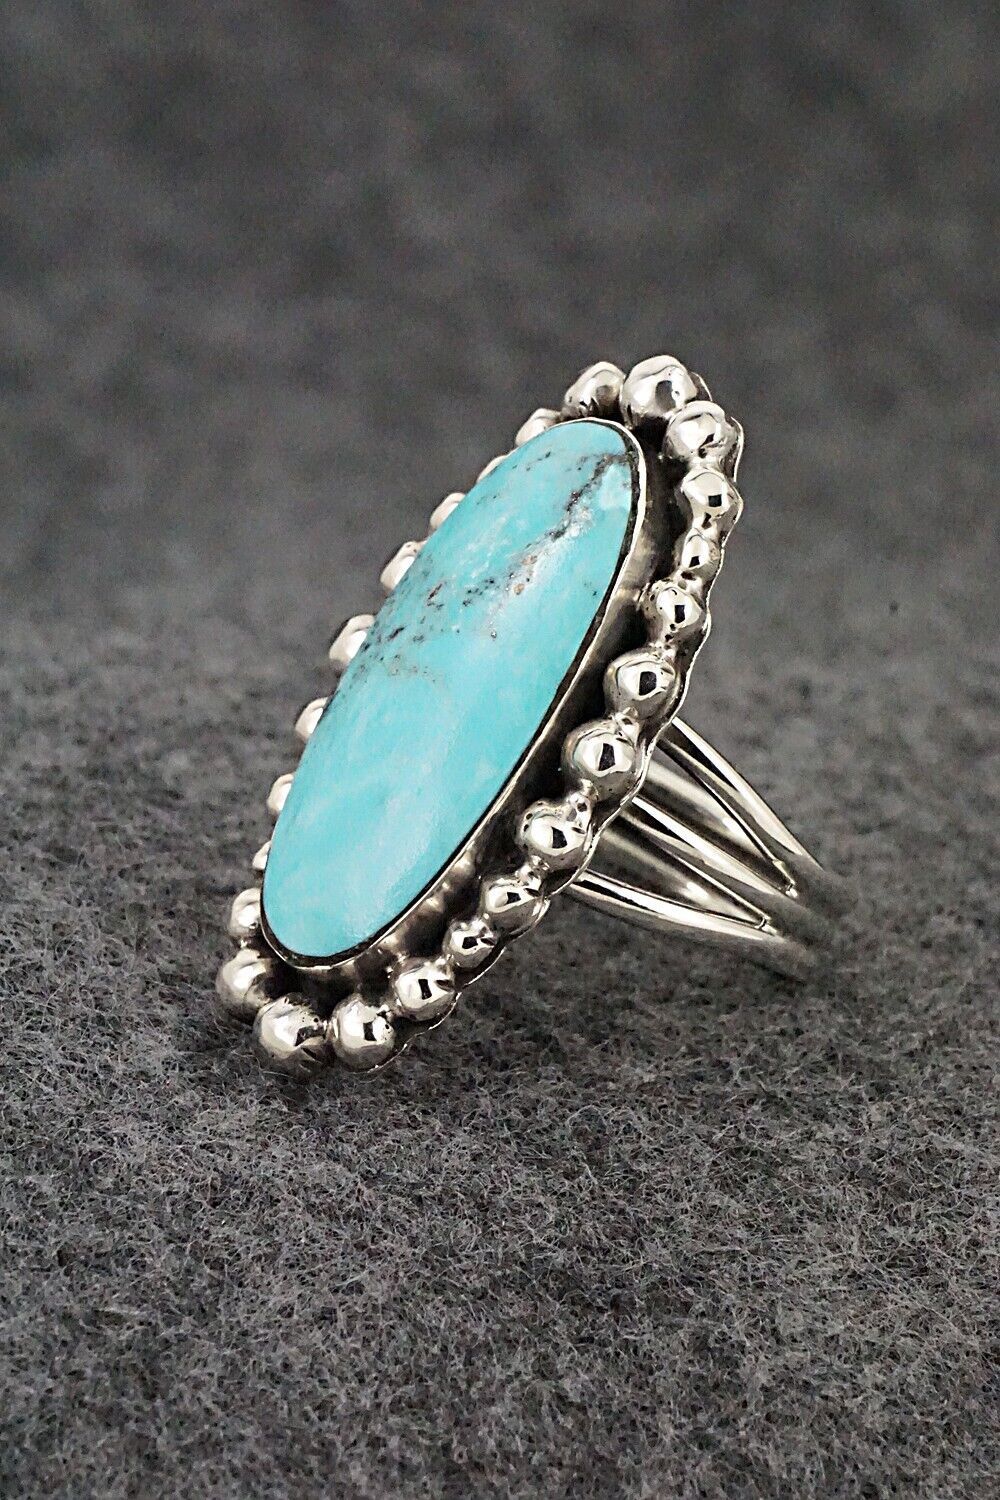 Turquoise & Sterling Silver Ring - Clarence Long - Size 7.5